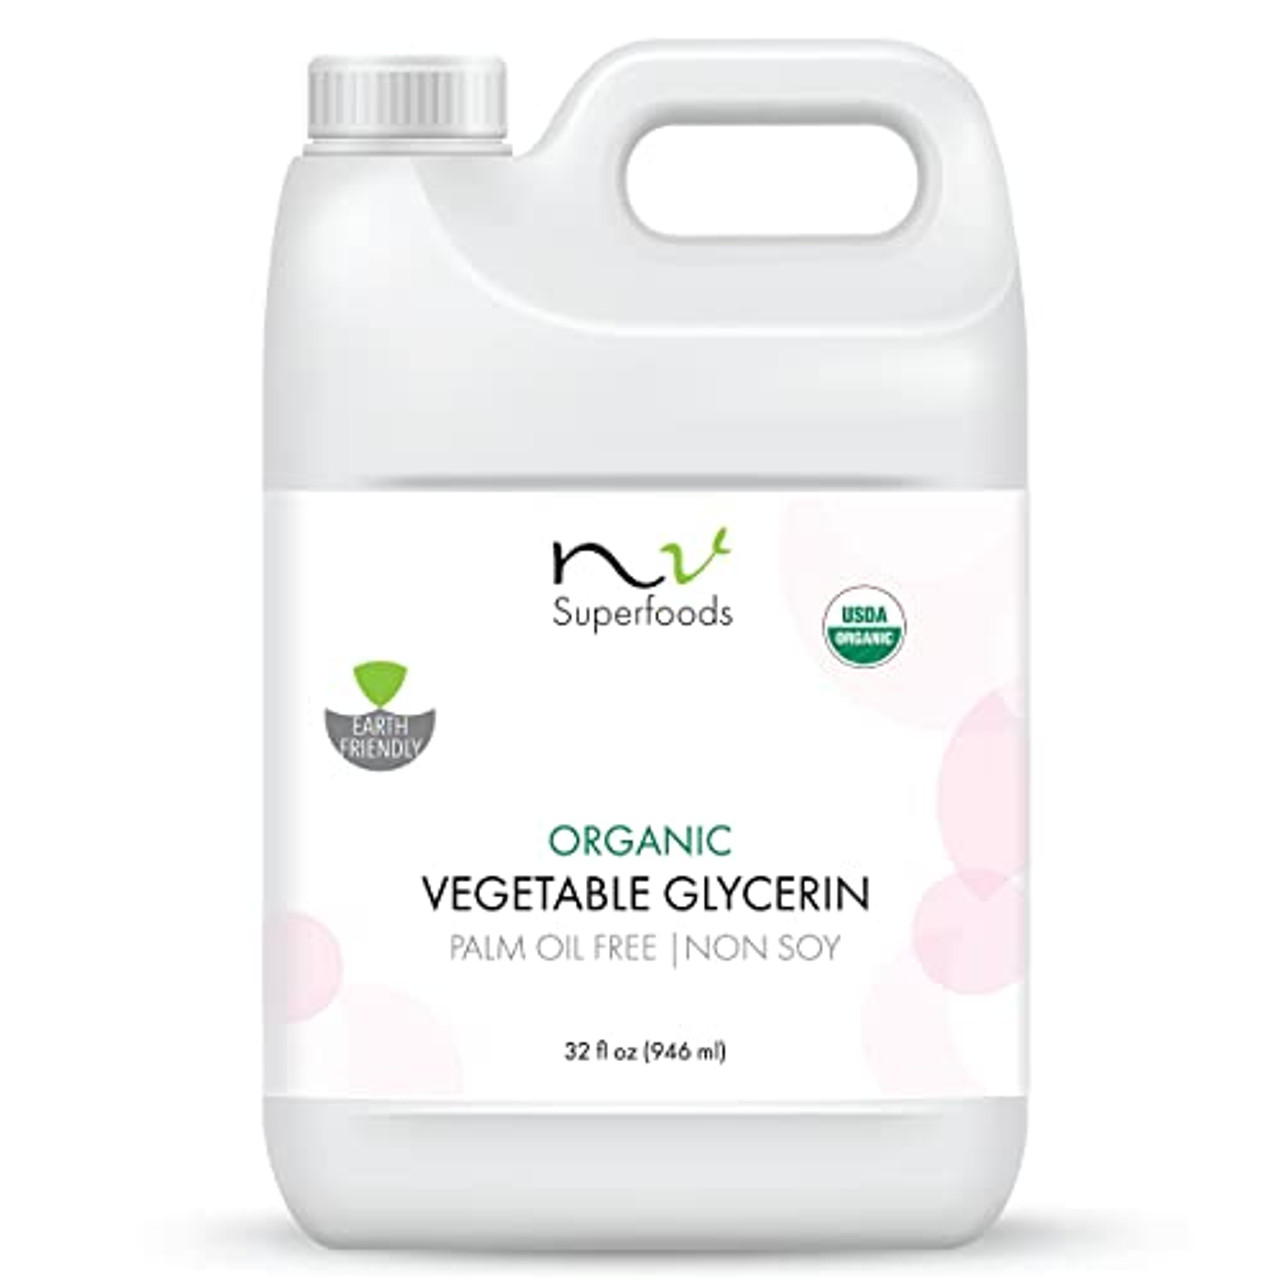 NV Superfoods - Organic Vegetable Glycerin - 32 Fl Oz - USP Food Grade,  100% Natural, Carrier for Essential Oils, Perfect for Skin, Hair & Nails as